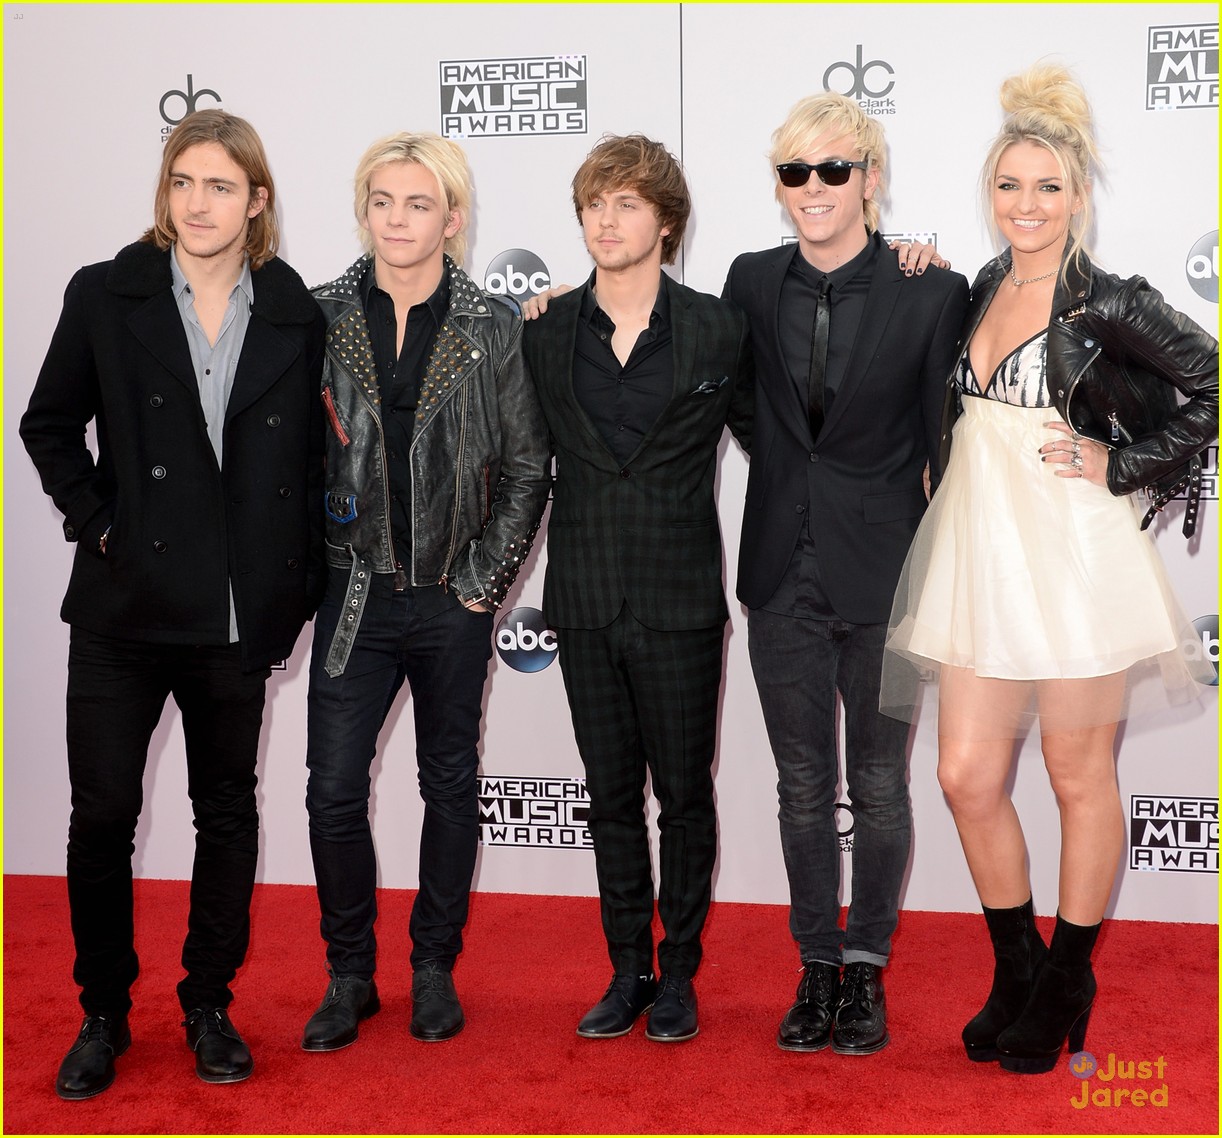 R5 in American Music Awards 2014